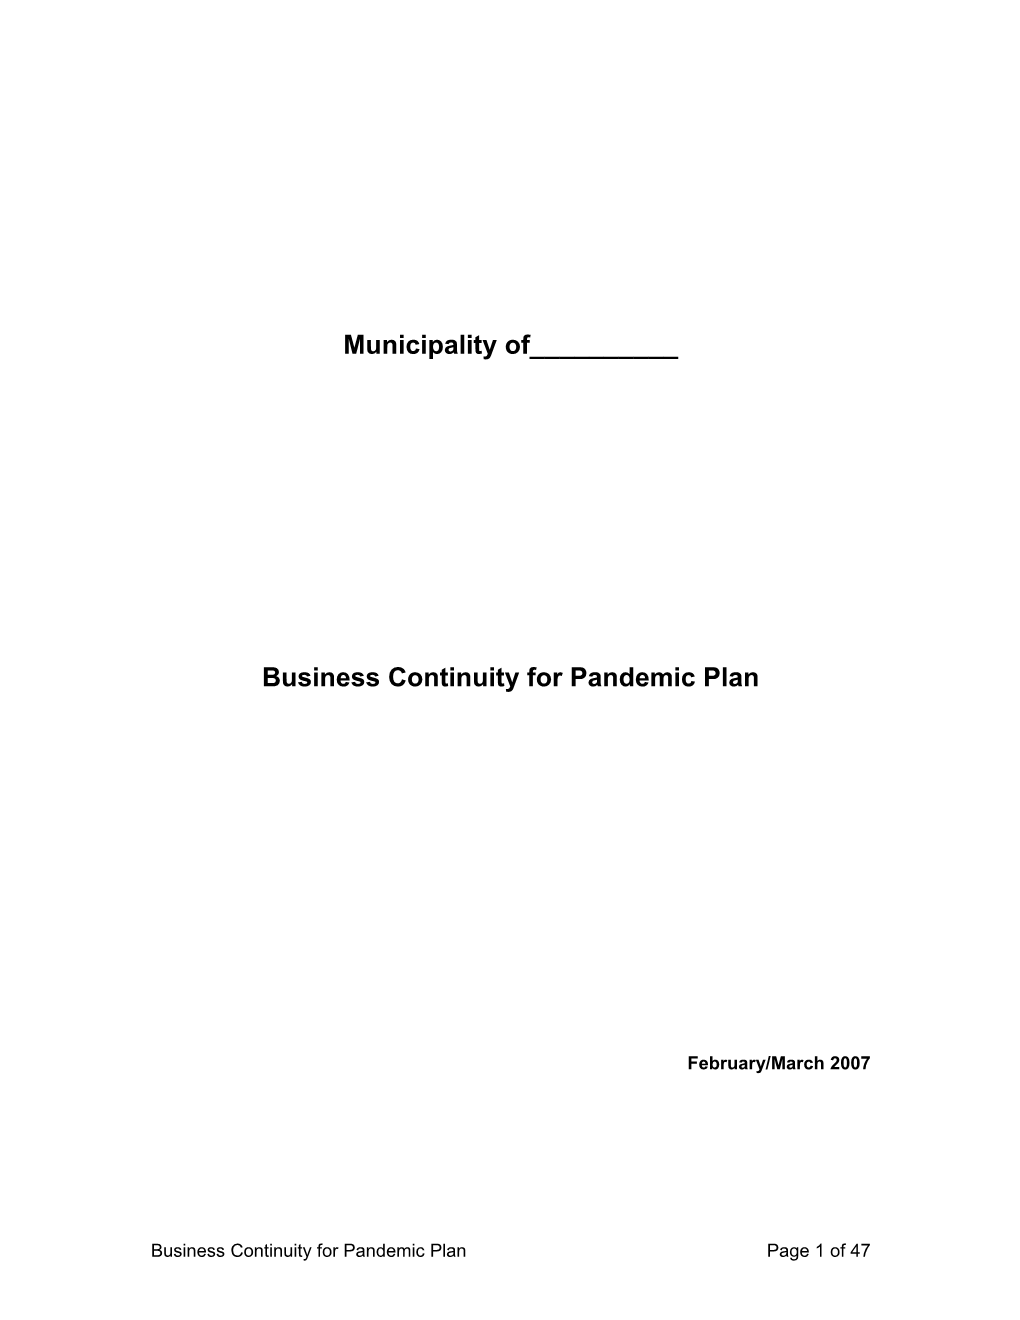 Business Continuity Planning s1